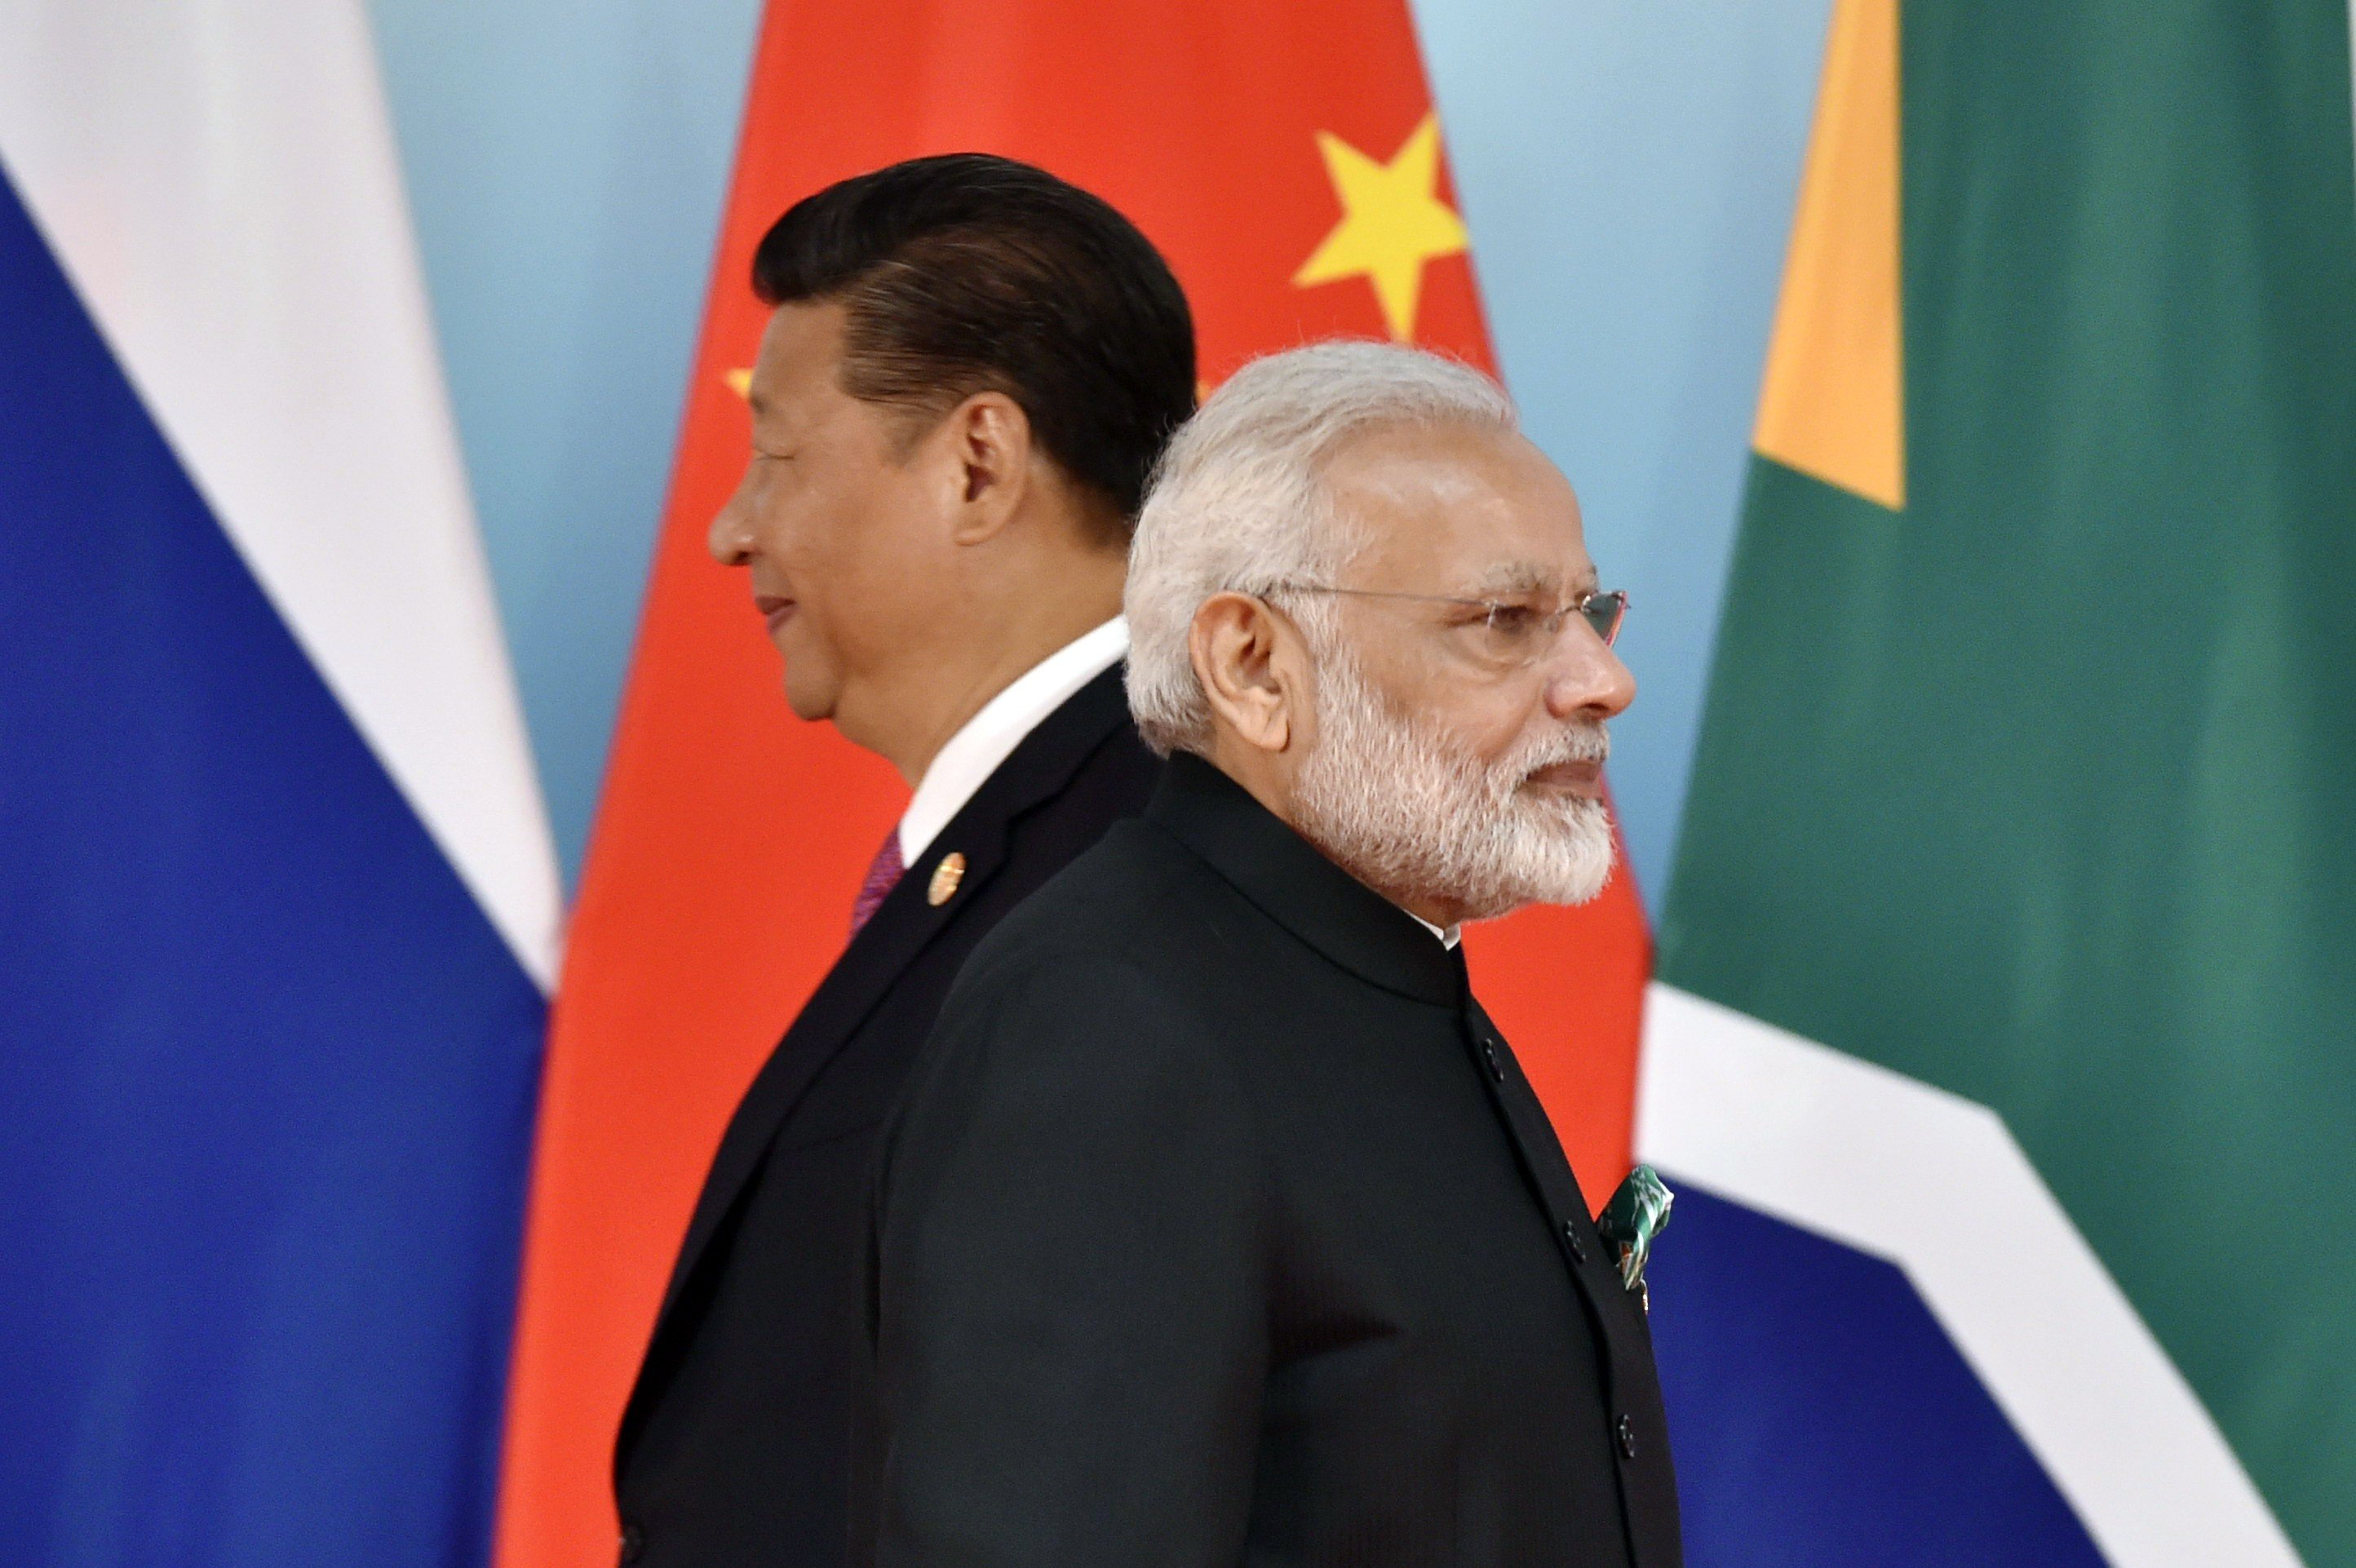 Chinese President Xi Jinping and Indian Prime Minister Narendra Modi. Photo: AFP